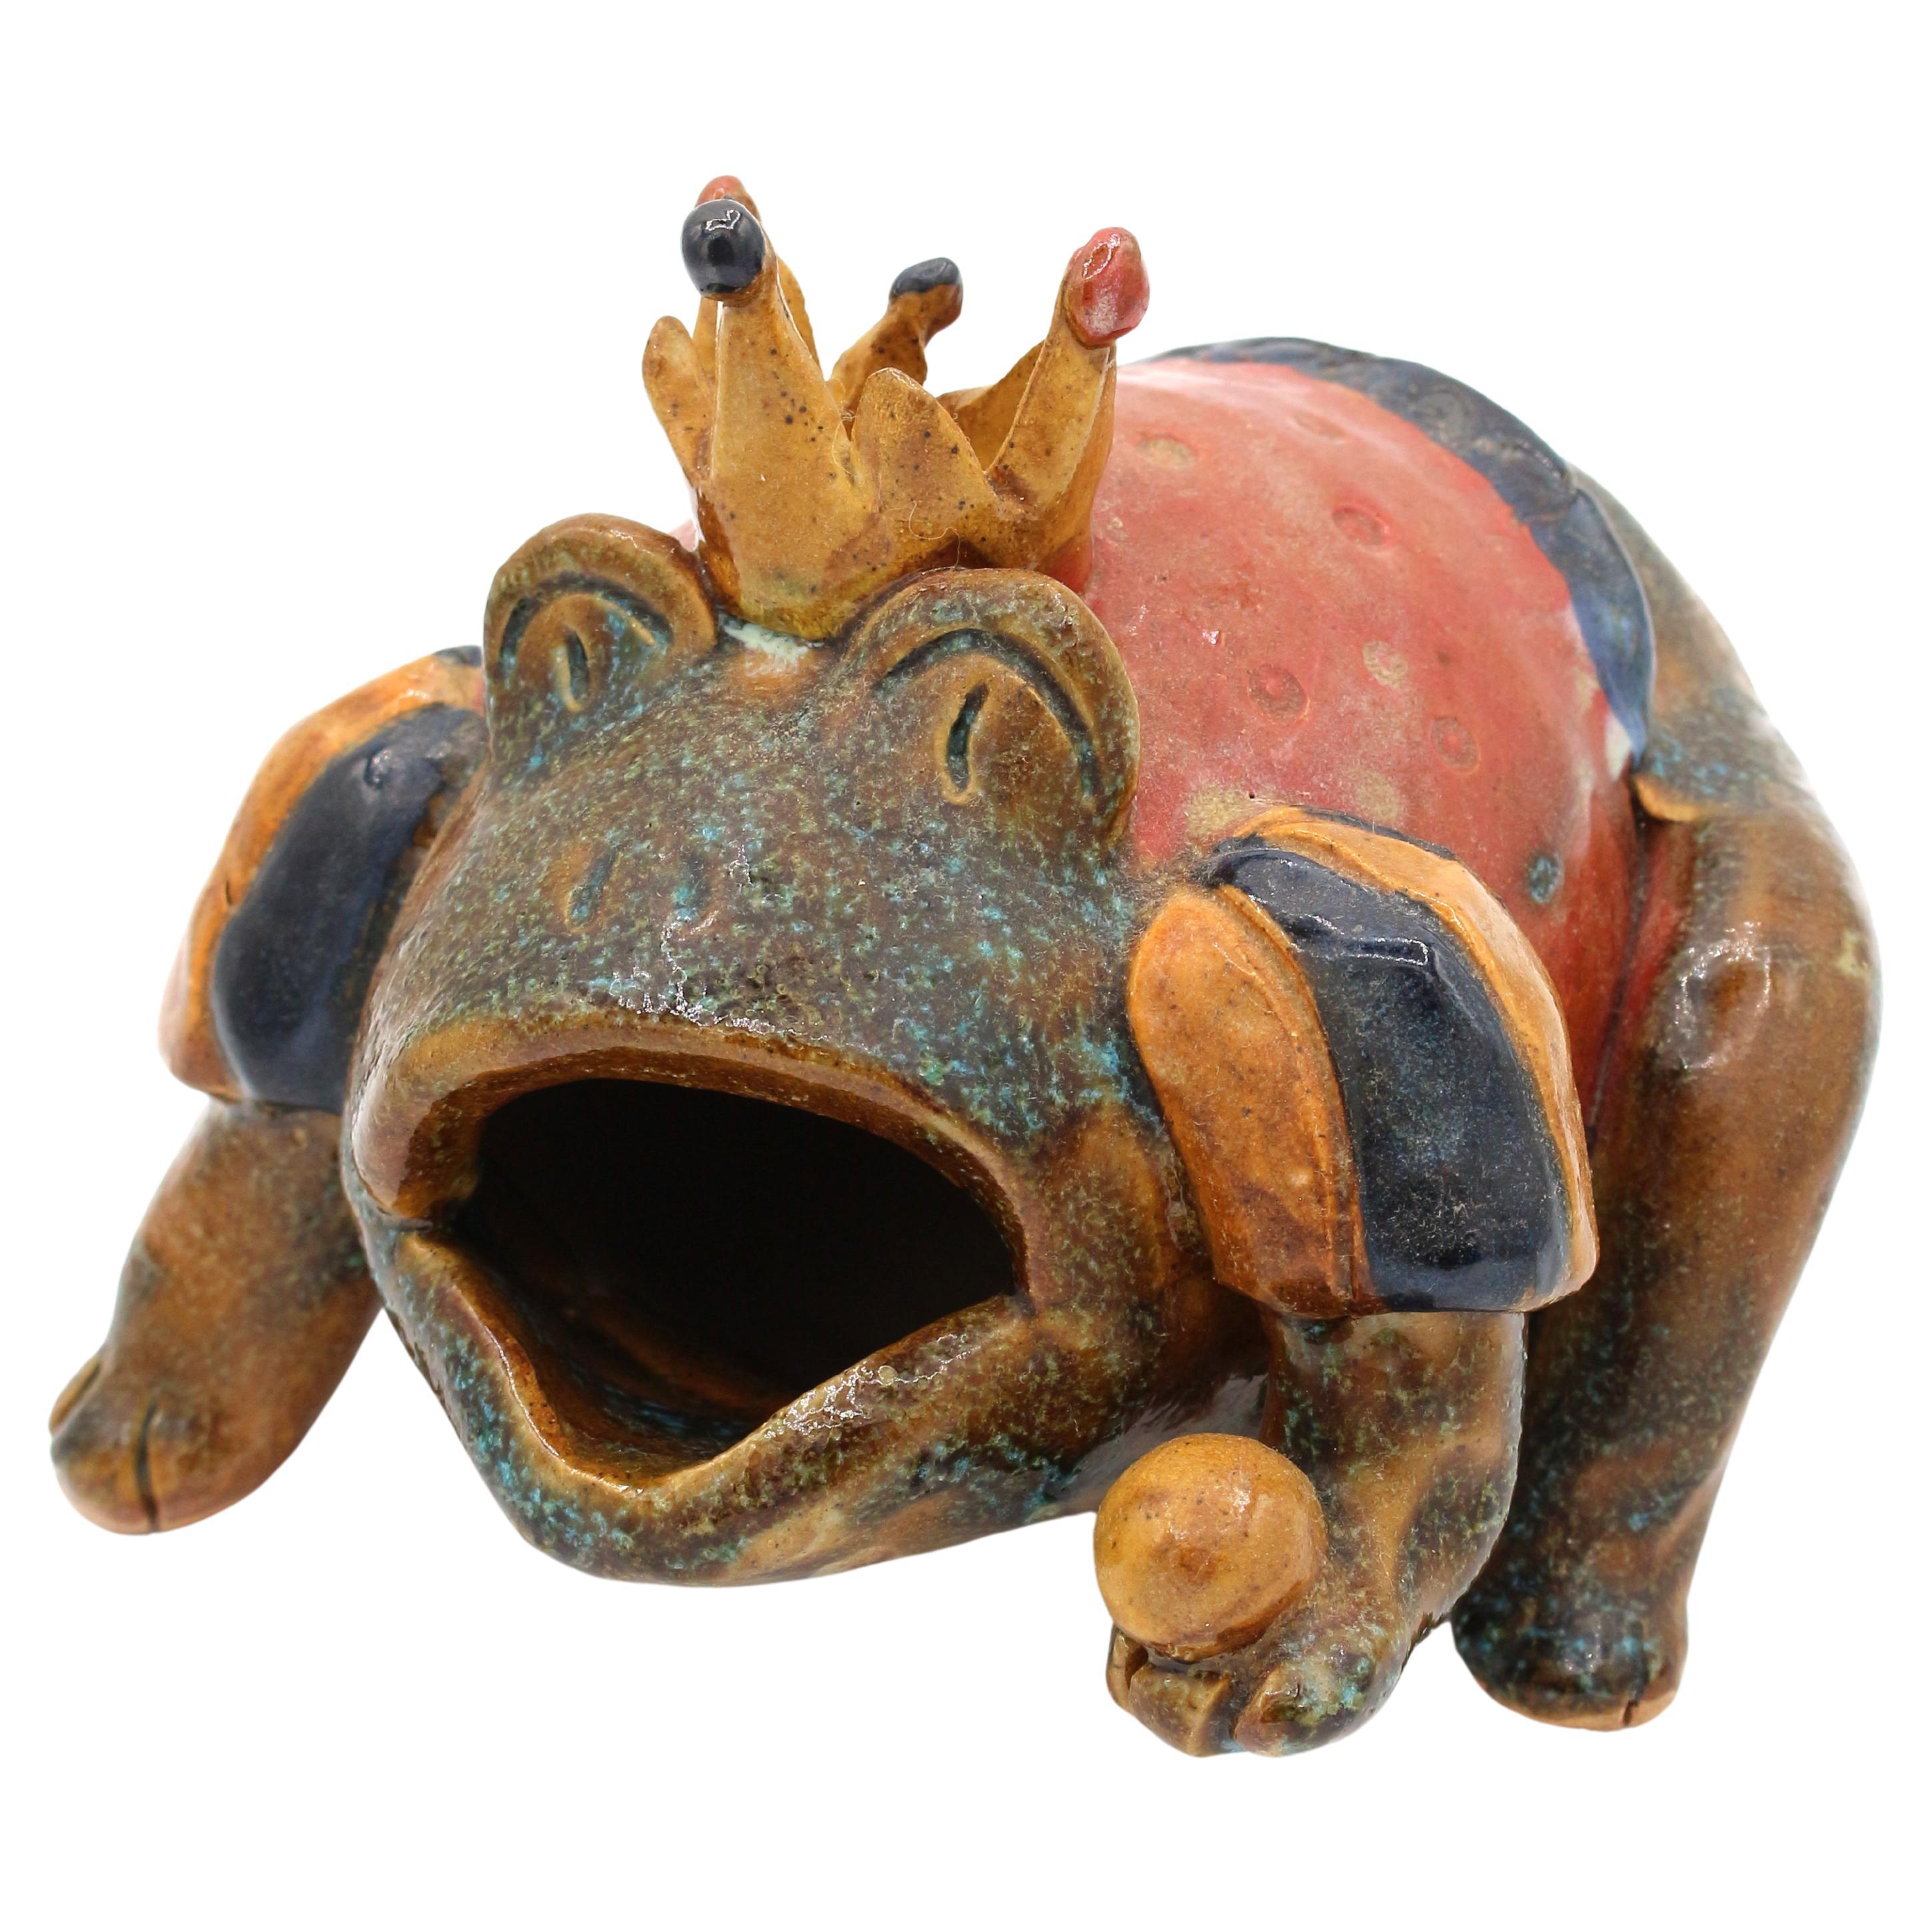 Pottery "Frog King" by Crystal King